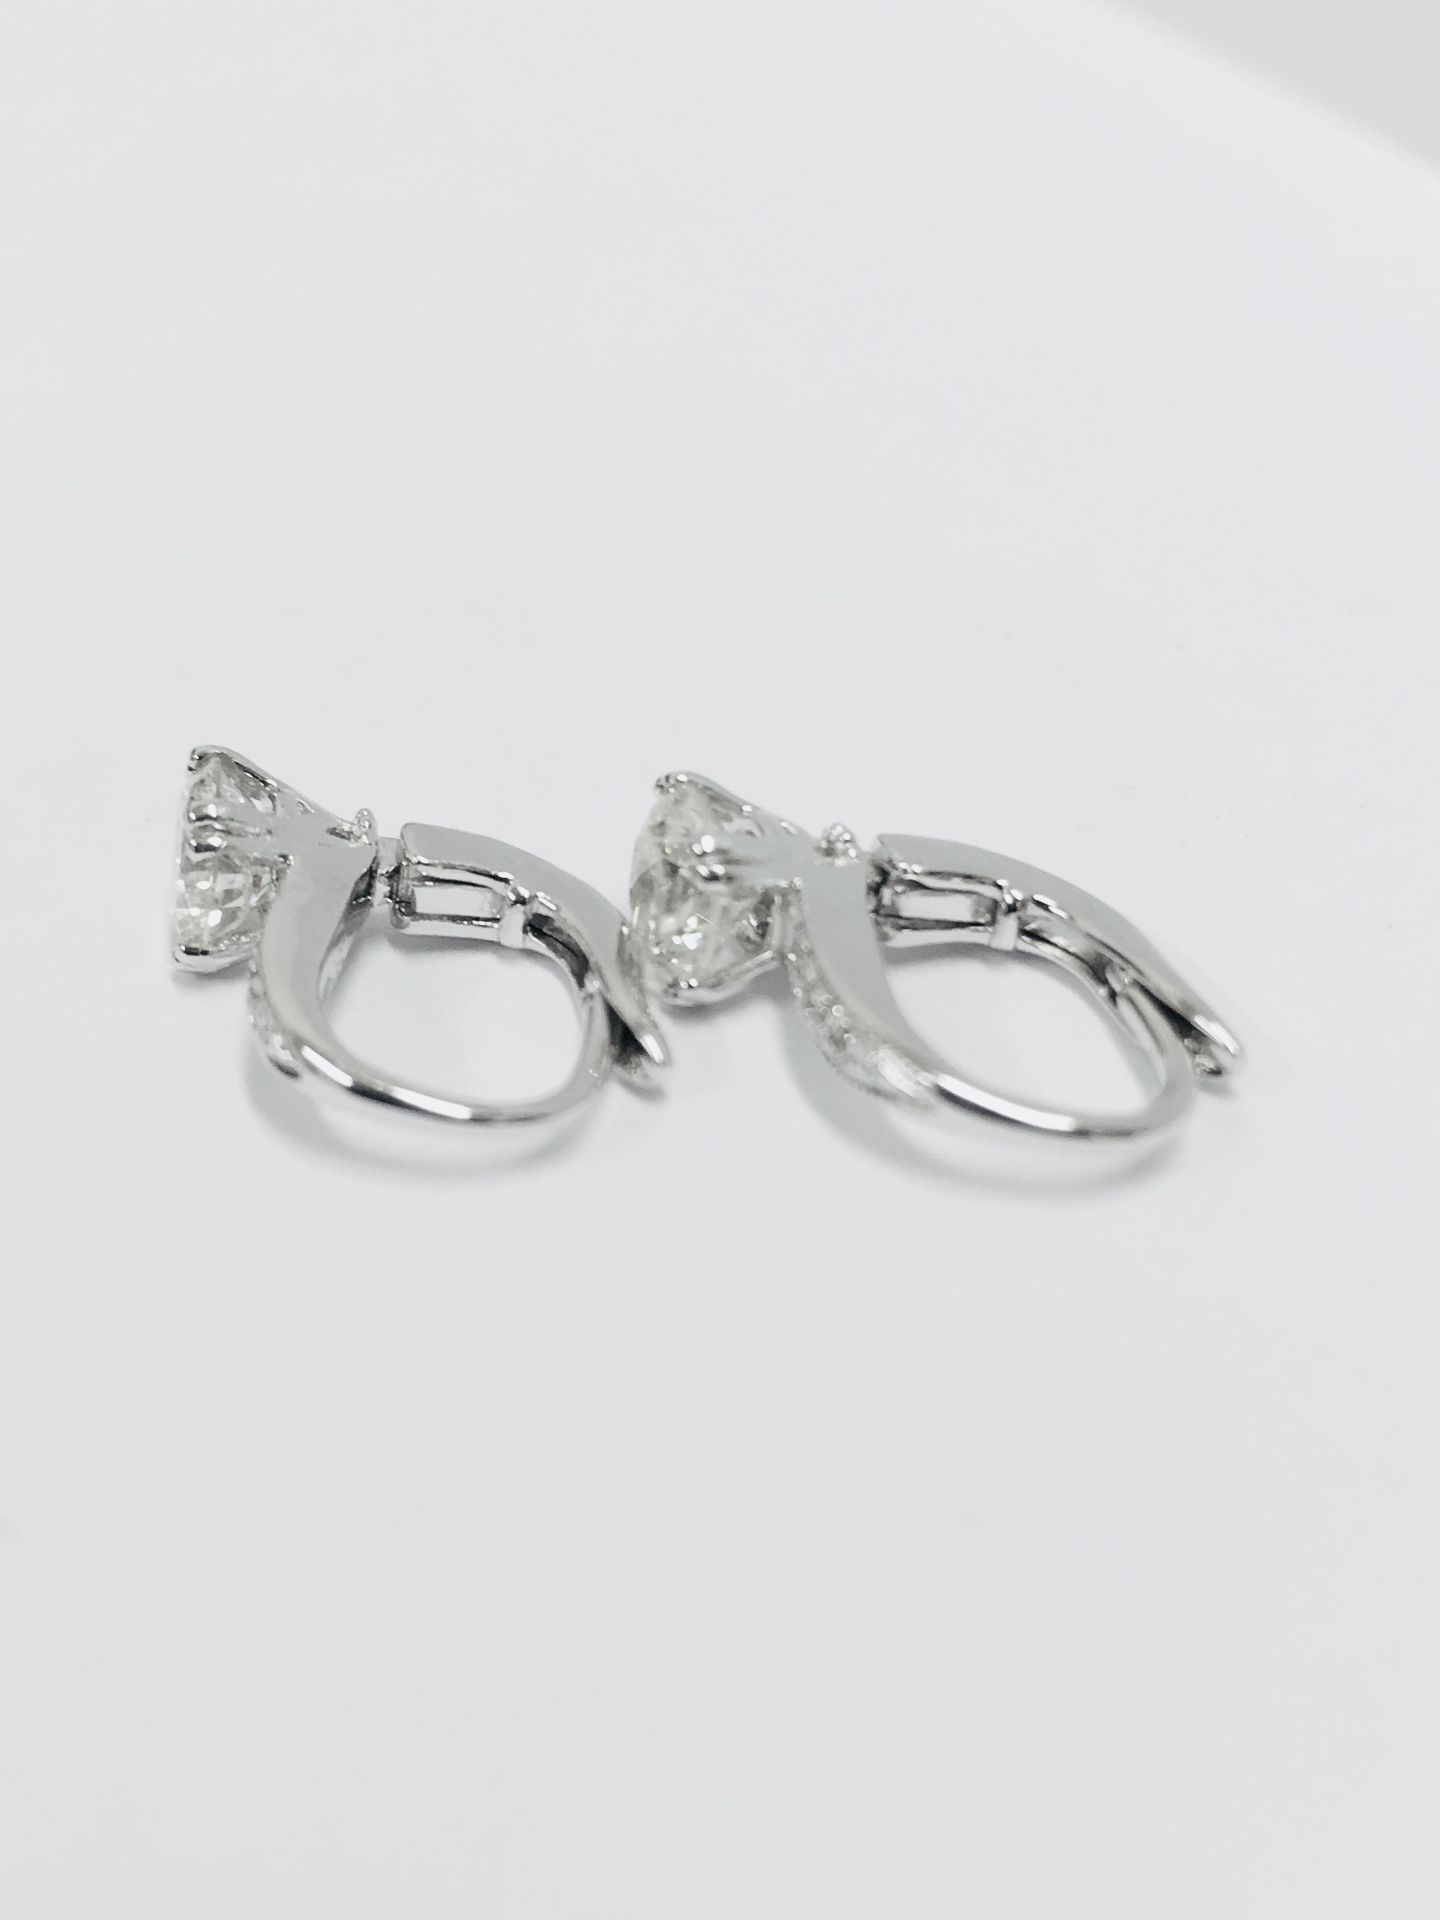 18Ct White Gold Hoop Style Earrings With Hinge Fastners. - Image 22 of 22